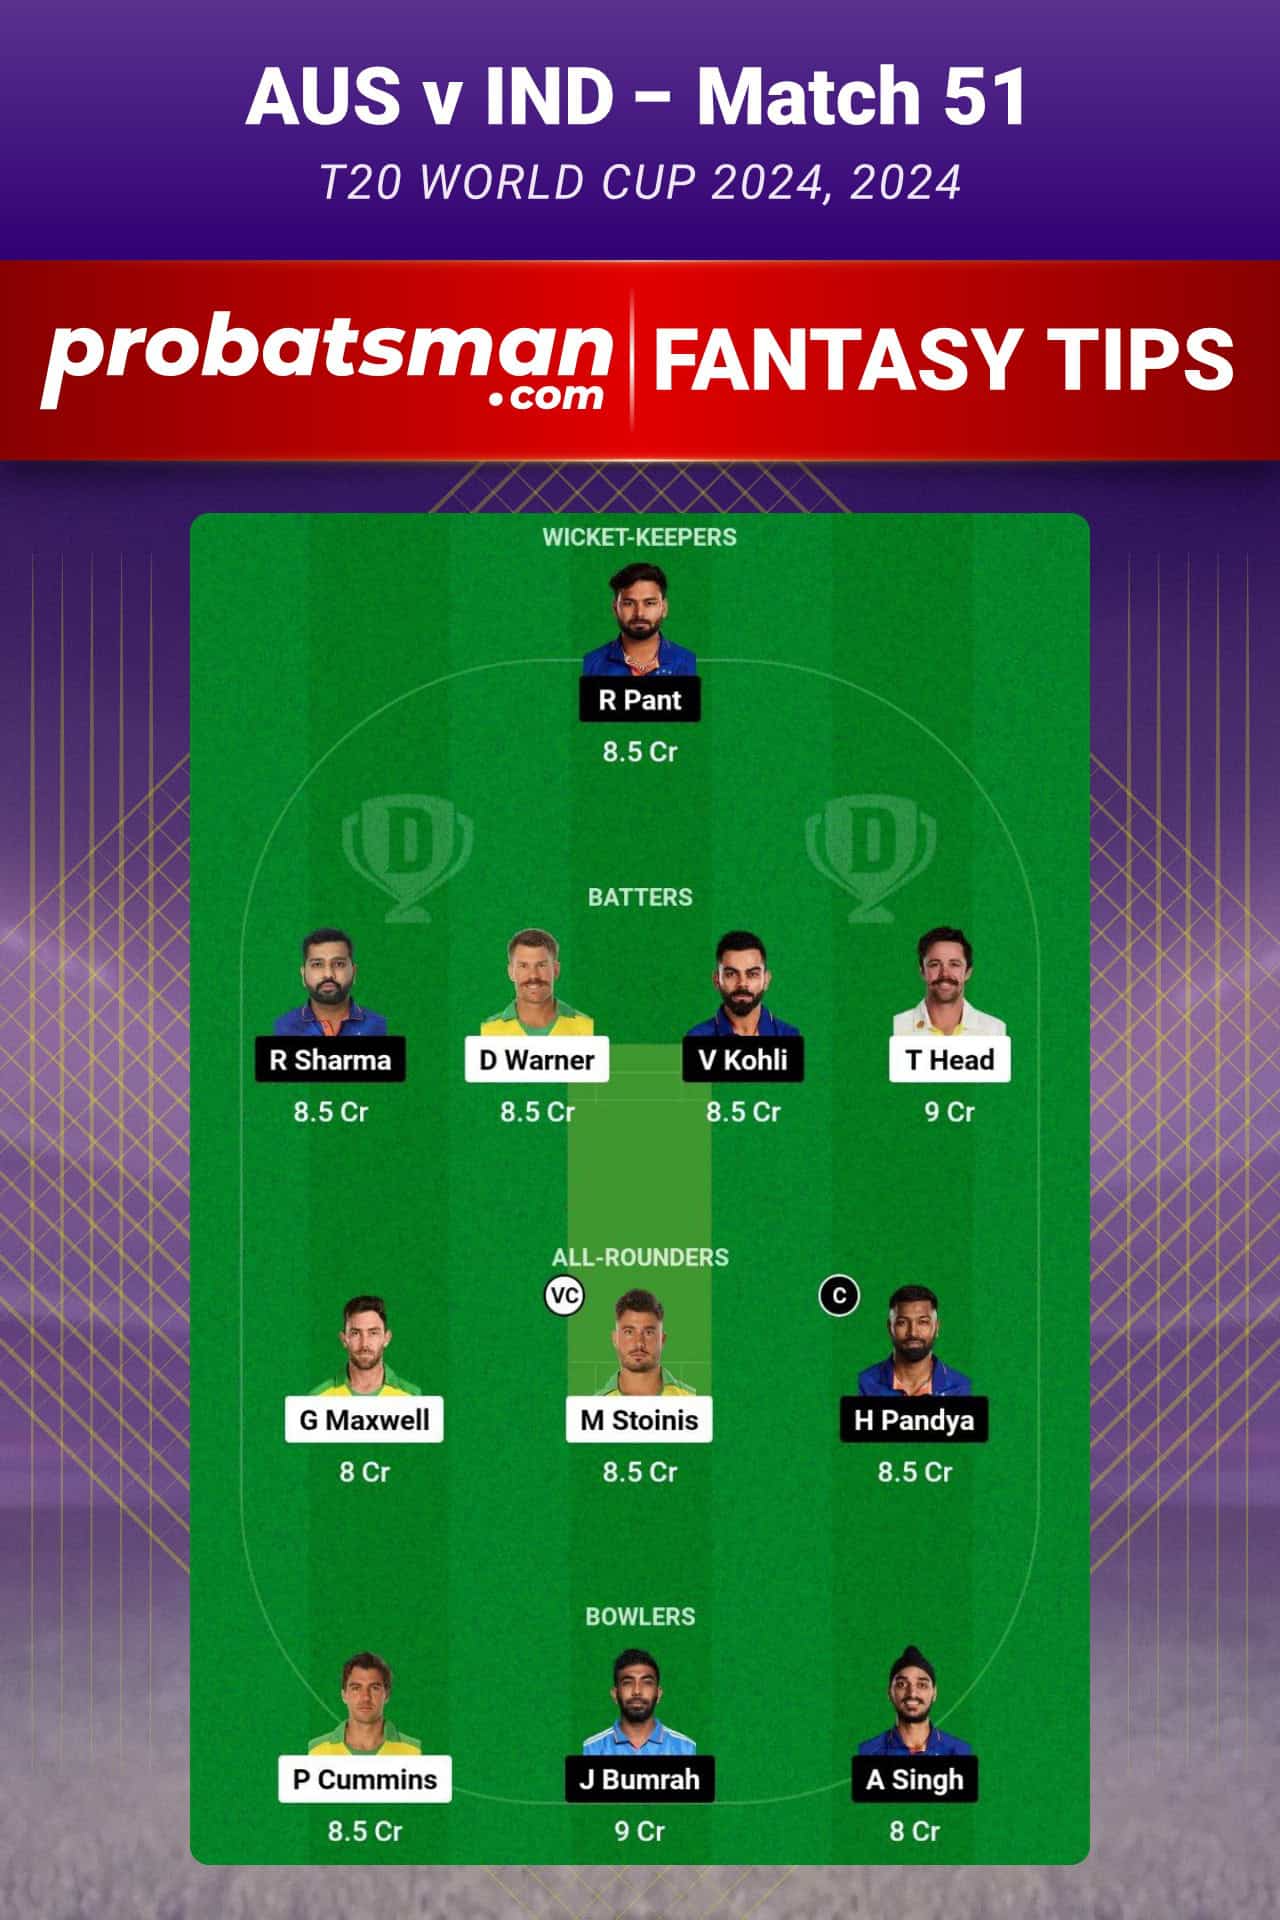 AUS vs IND Dream11 Prediction For Match 51 of T20 World Cup 2024